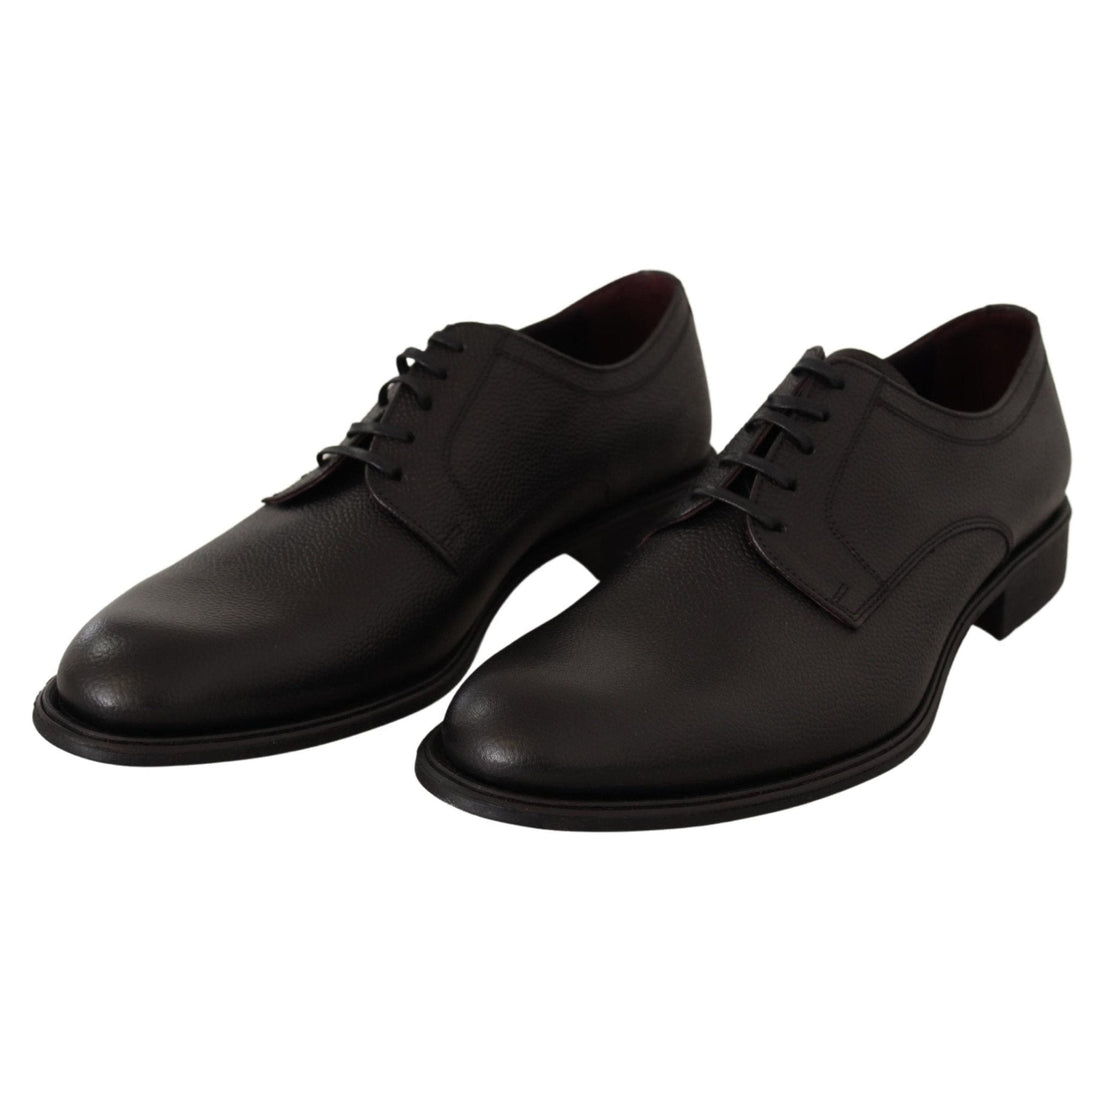 Dolce & Gabbana Black Leather Lace Up Mens Formal Derby Shoes